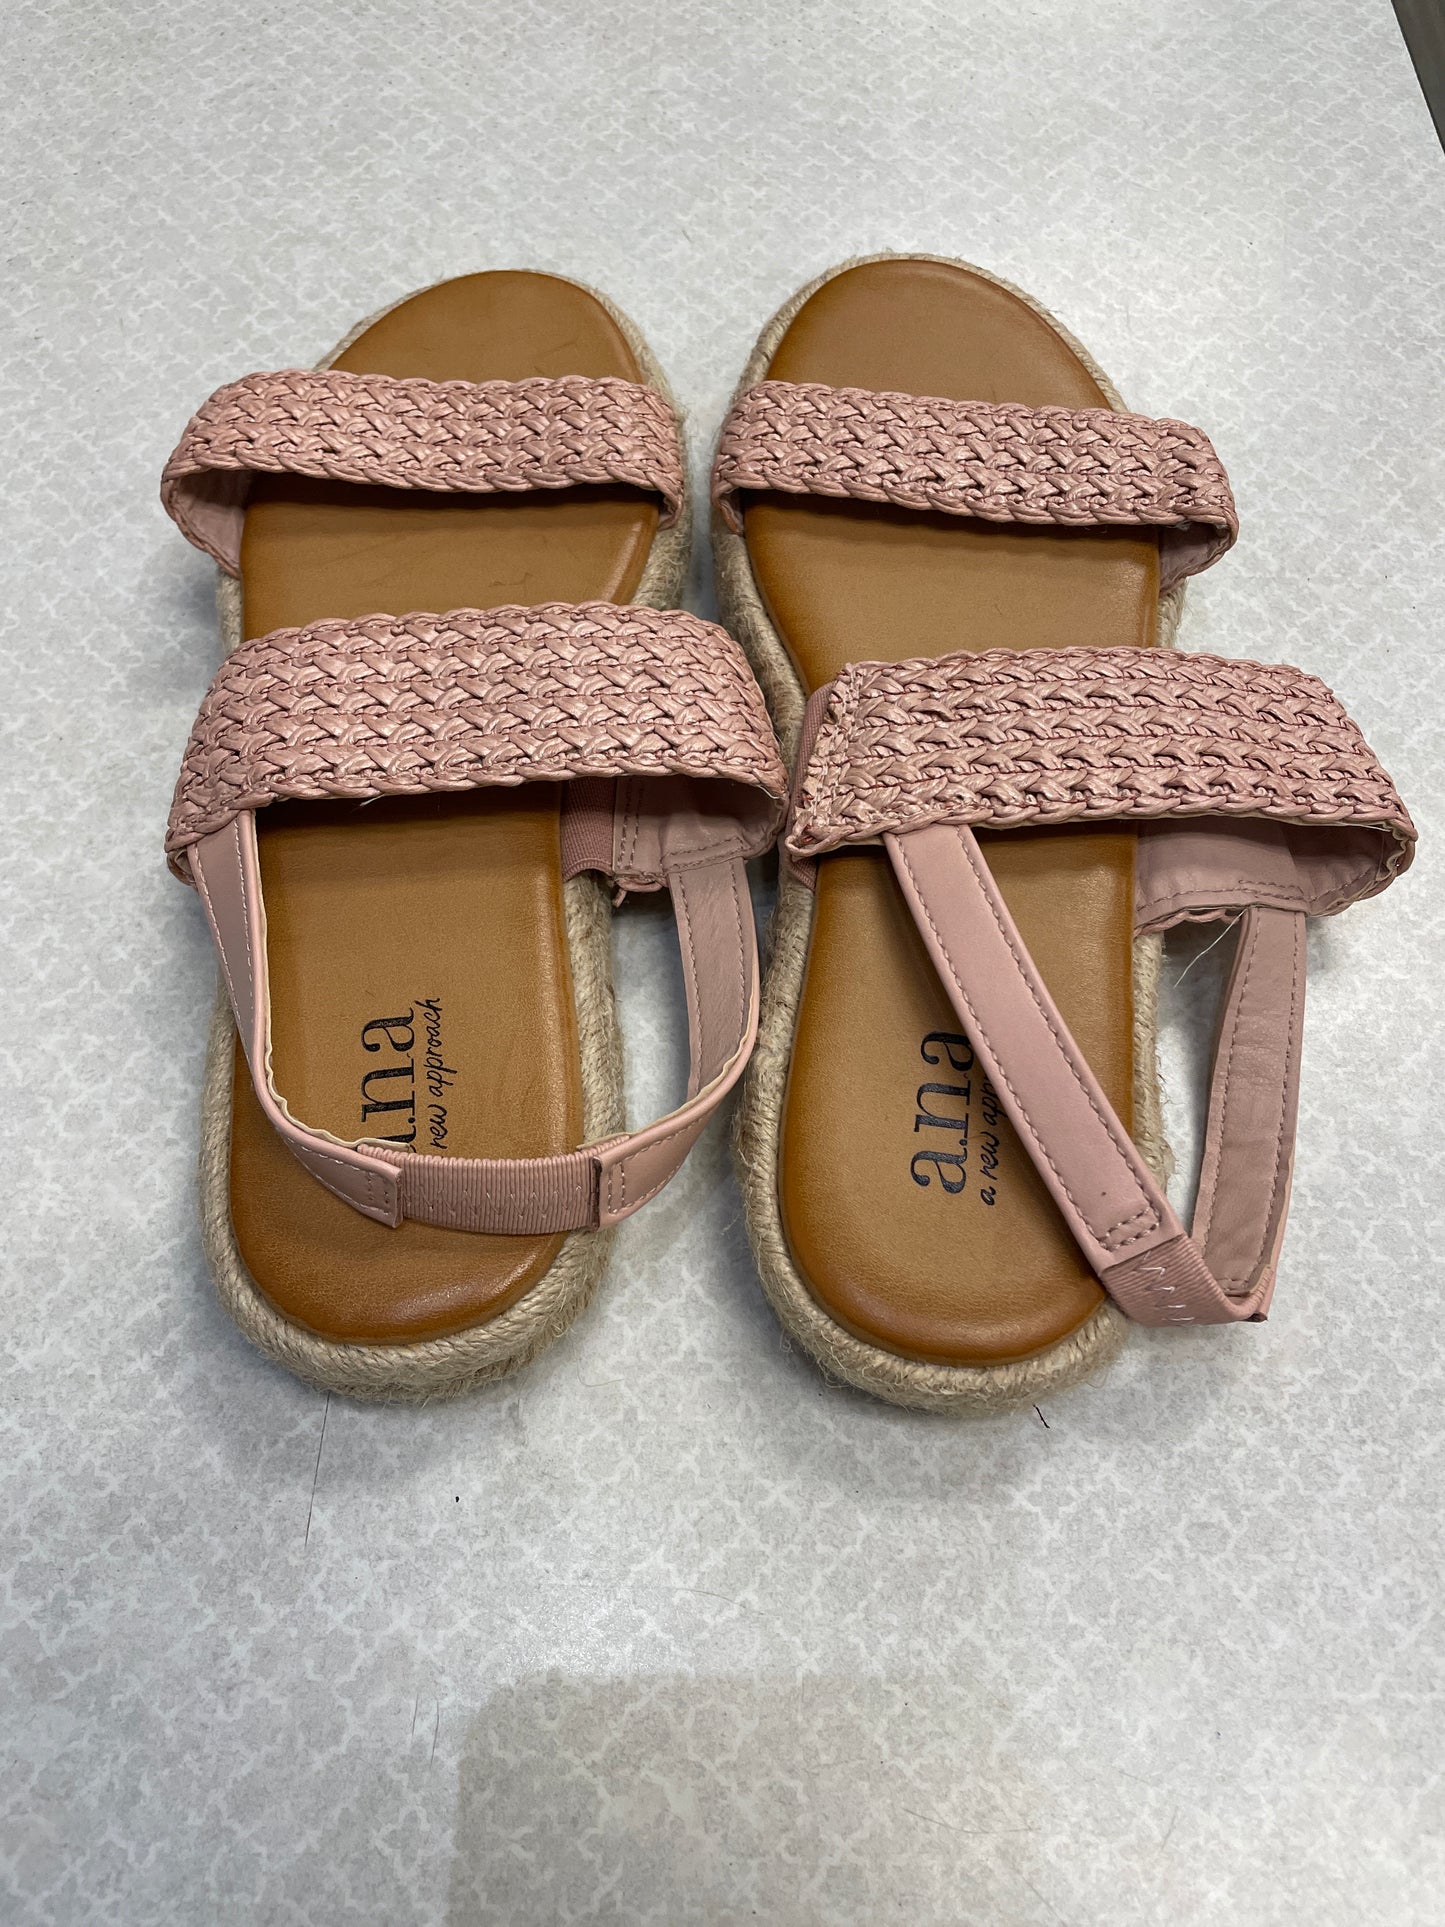 Sandals Flats By Ana  Size: 6.5